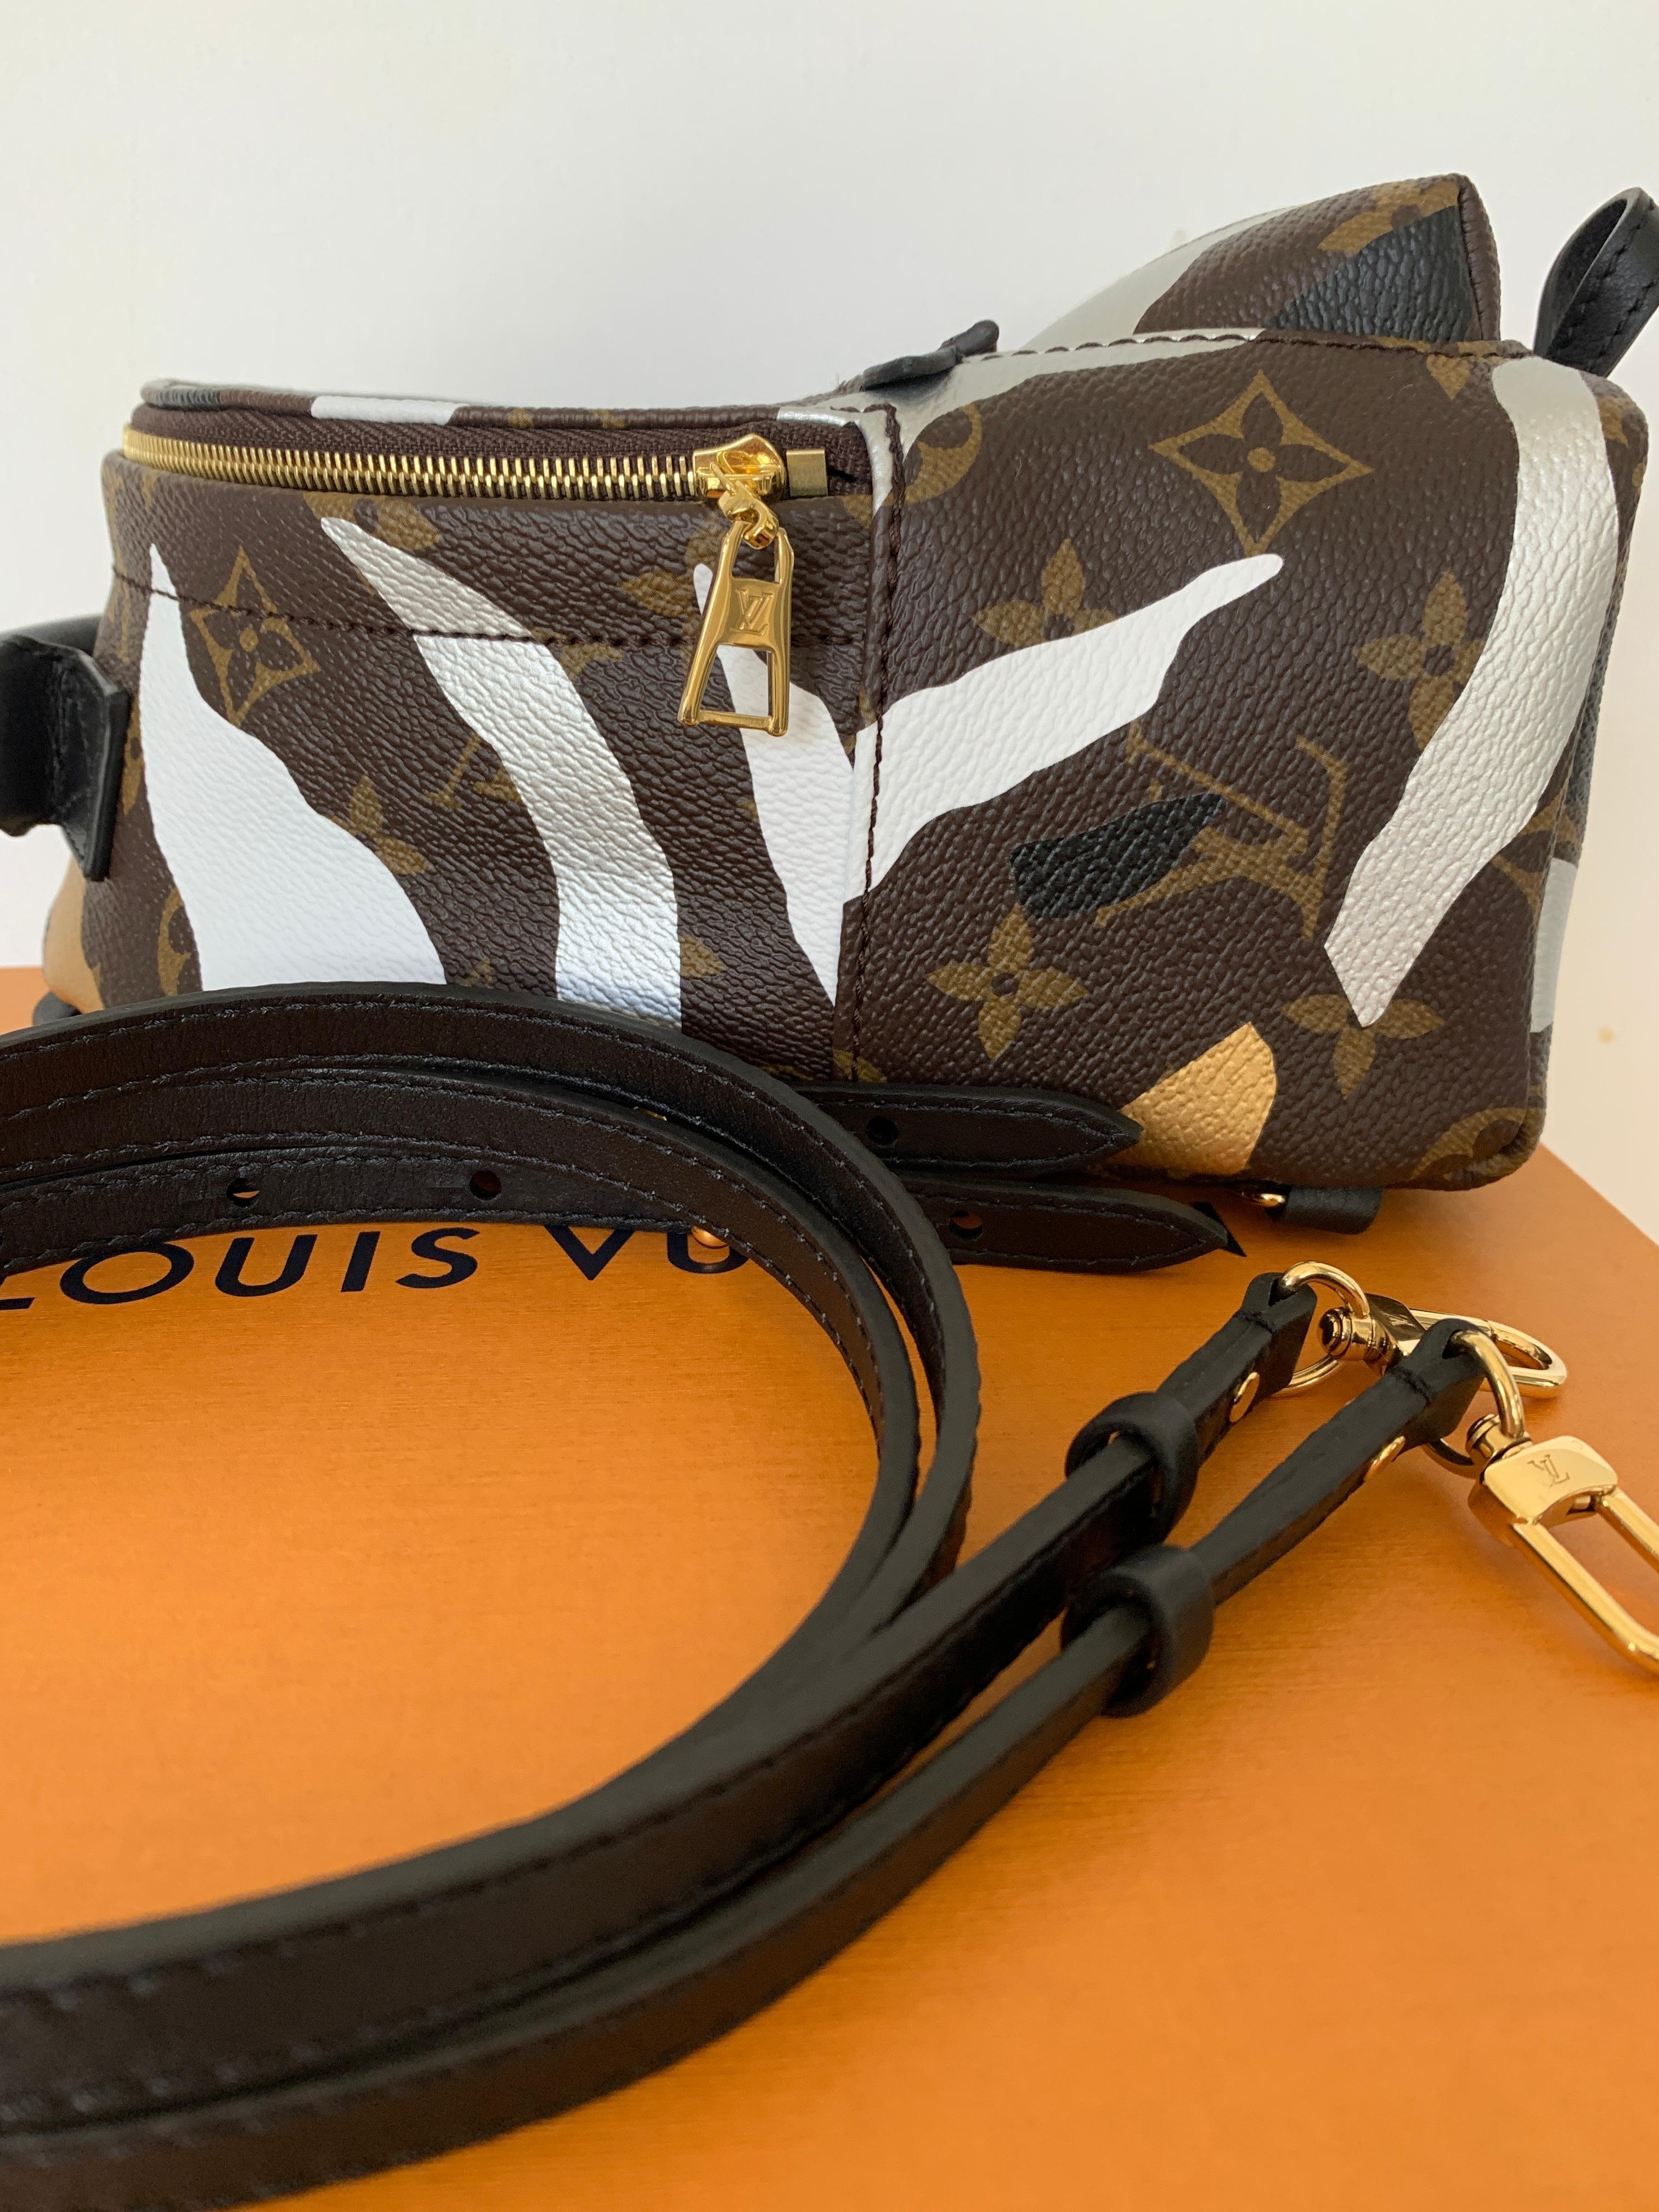 Louis Vuitton 
League of Legends 
LVxLoL
Be First!
6.69 x 8.66 x 3.94 inches
(Length x Height x Width)
Gold / Silver
Monogram coated canvas
Cowhide-leather trim
Microfiber lining
Gold-color hardware
Top handle
2 removable, adjustable leather